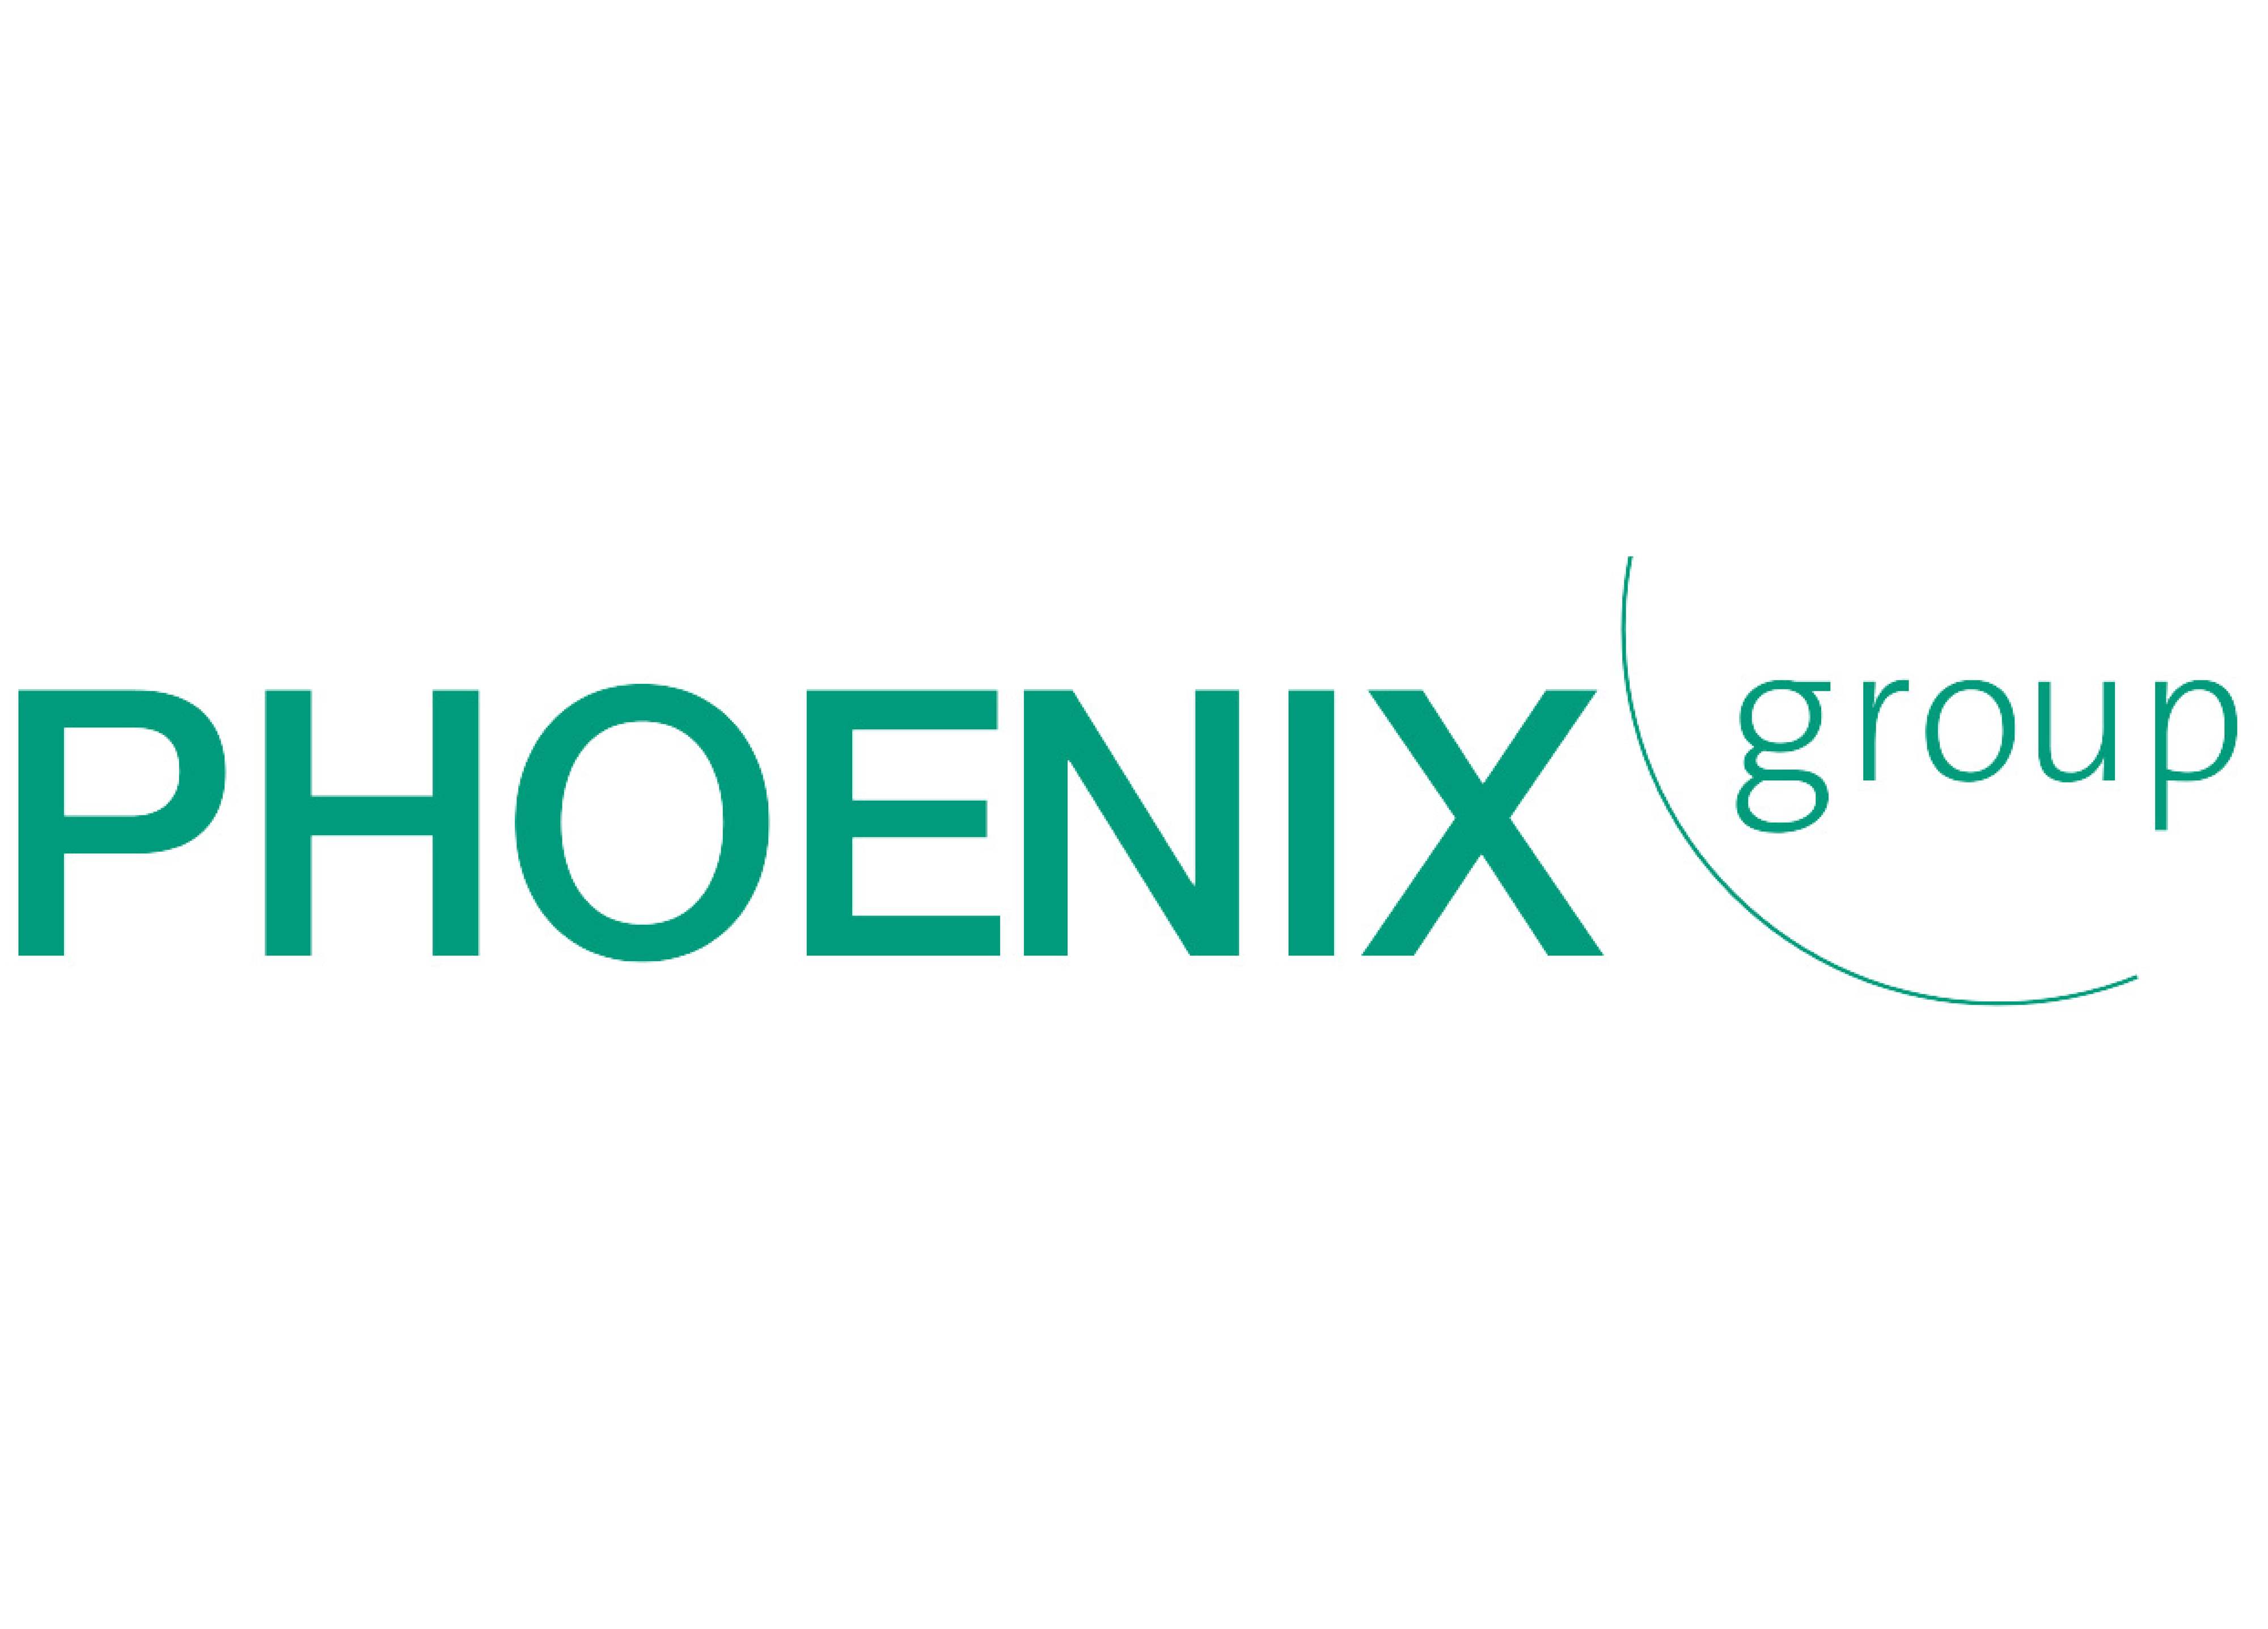 PHOENIX group achieves growth in the first quarter Tamro